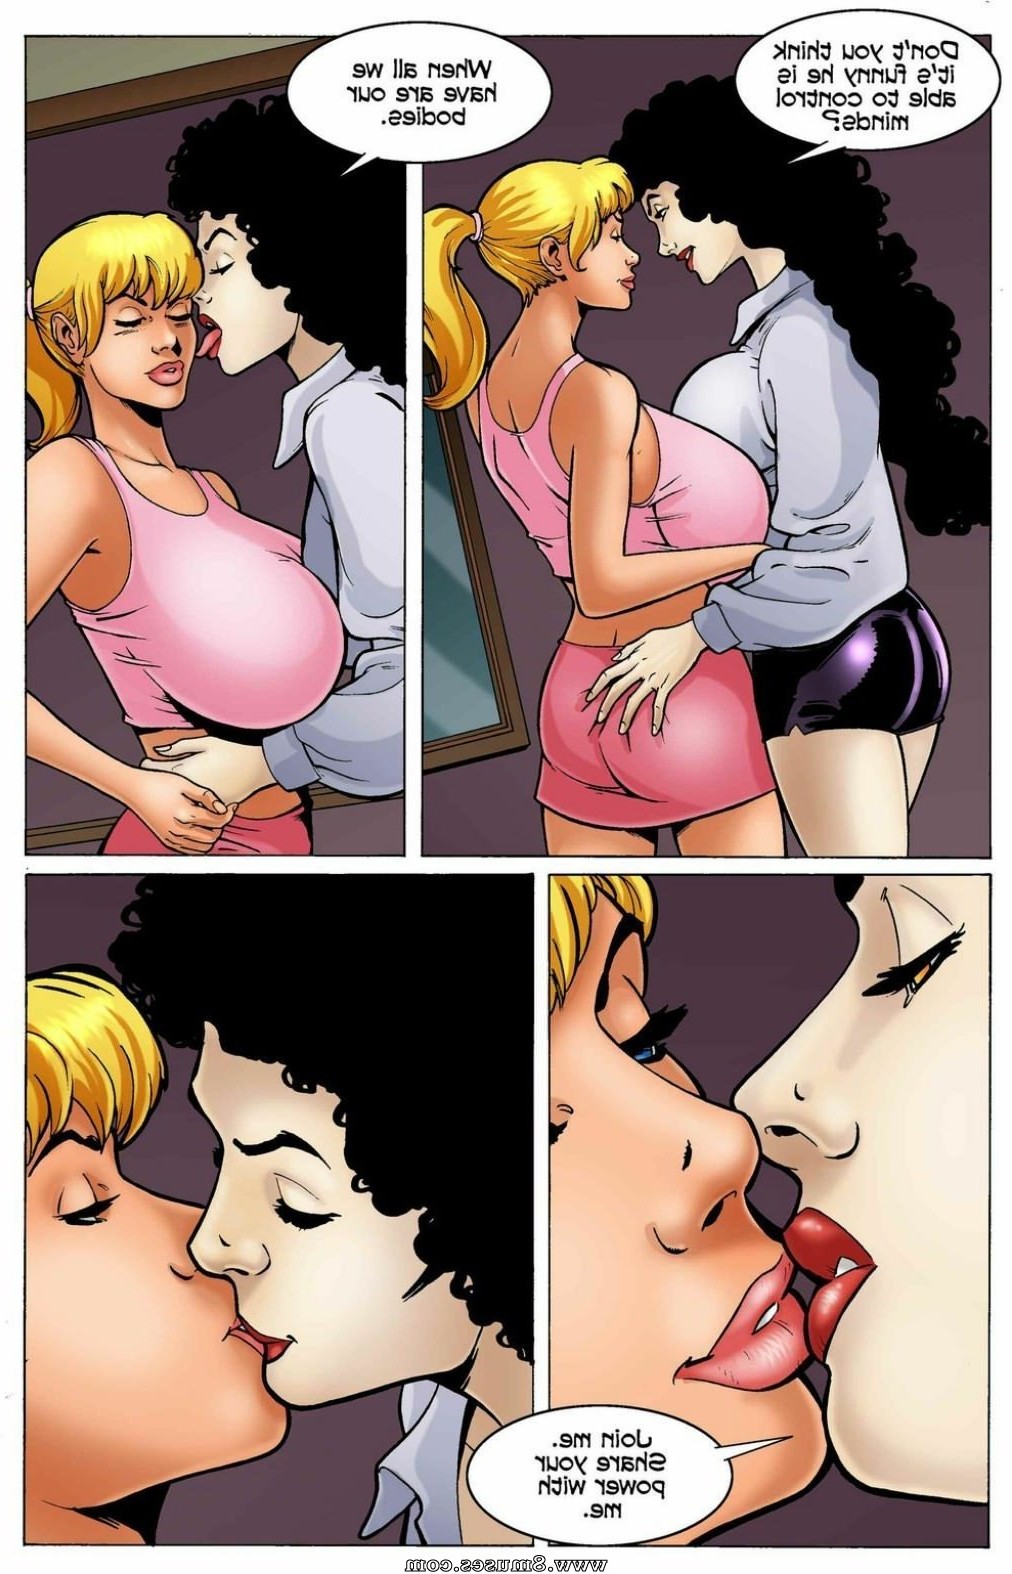 BE-Story-Club-Comics/Lilith/Issue-3 Lilith_-_Issue_3_9.jpg